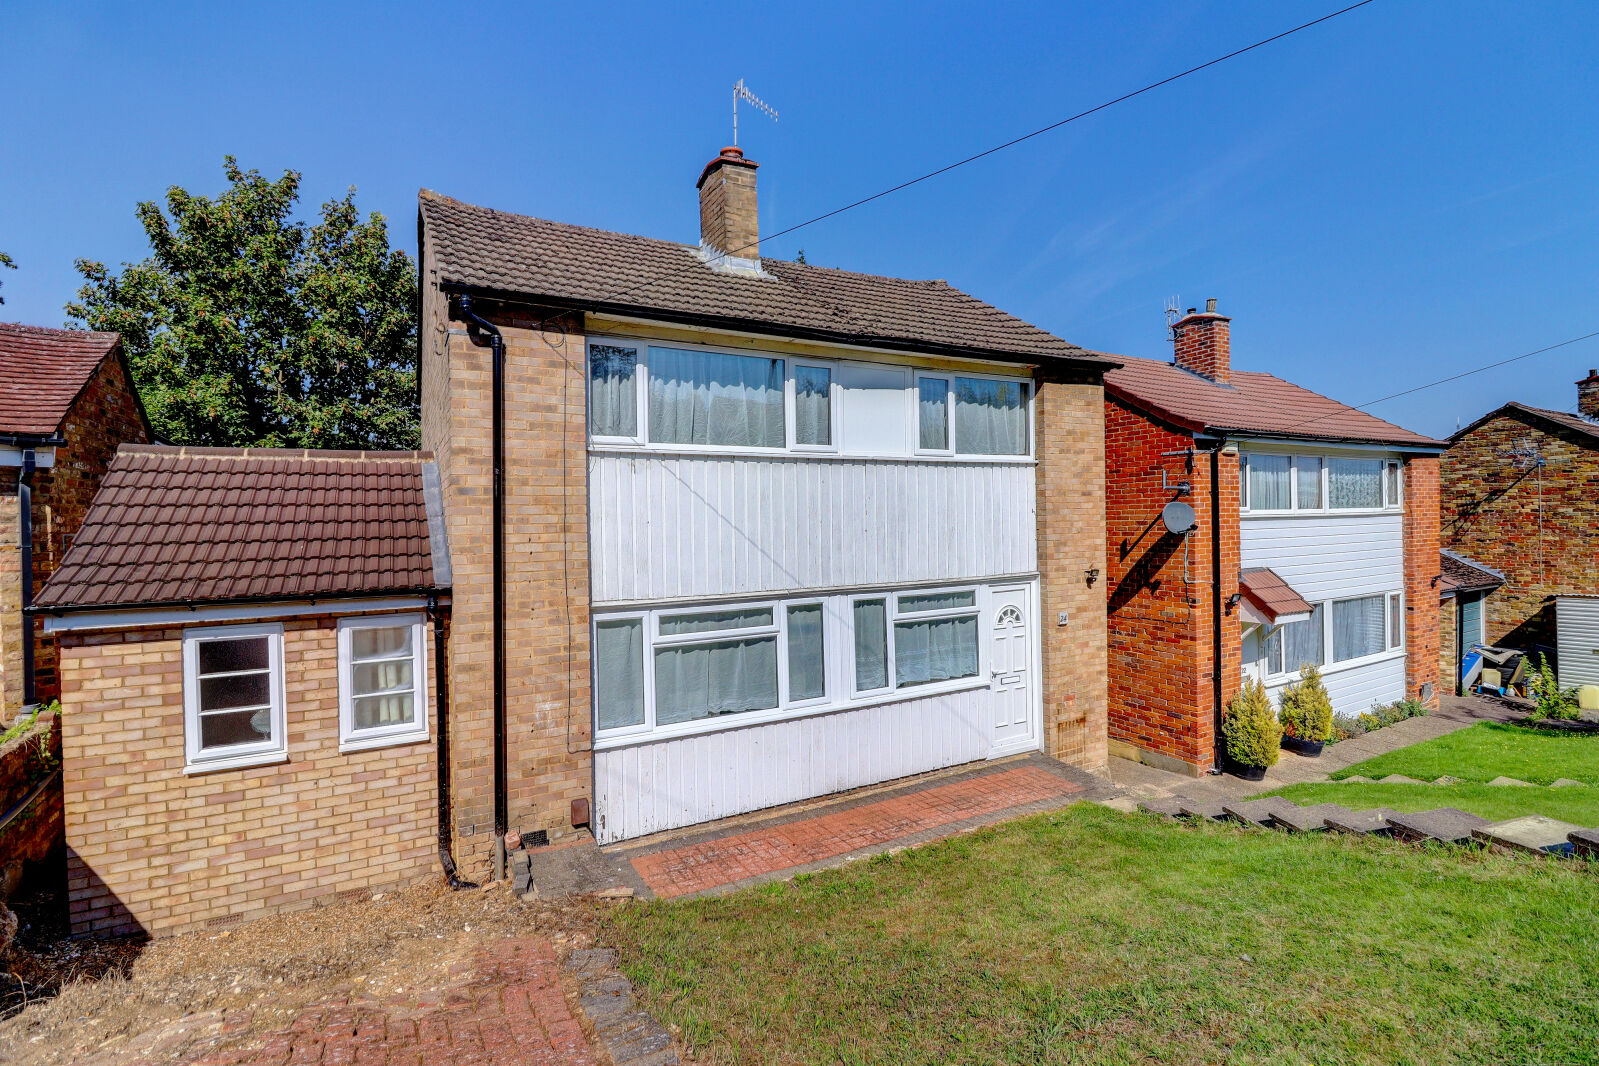 3 bedroom detached house for sale Sharrow Vale, High Wycombe, HP12, main image